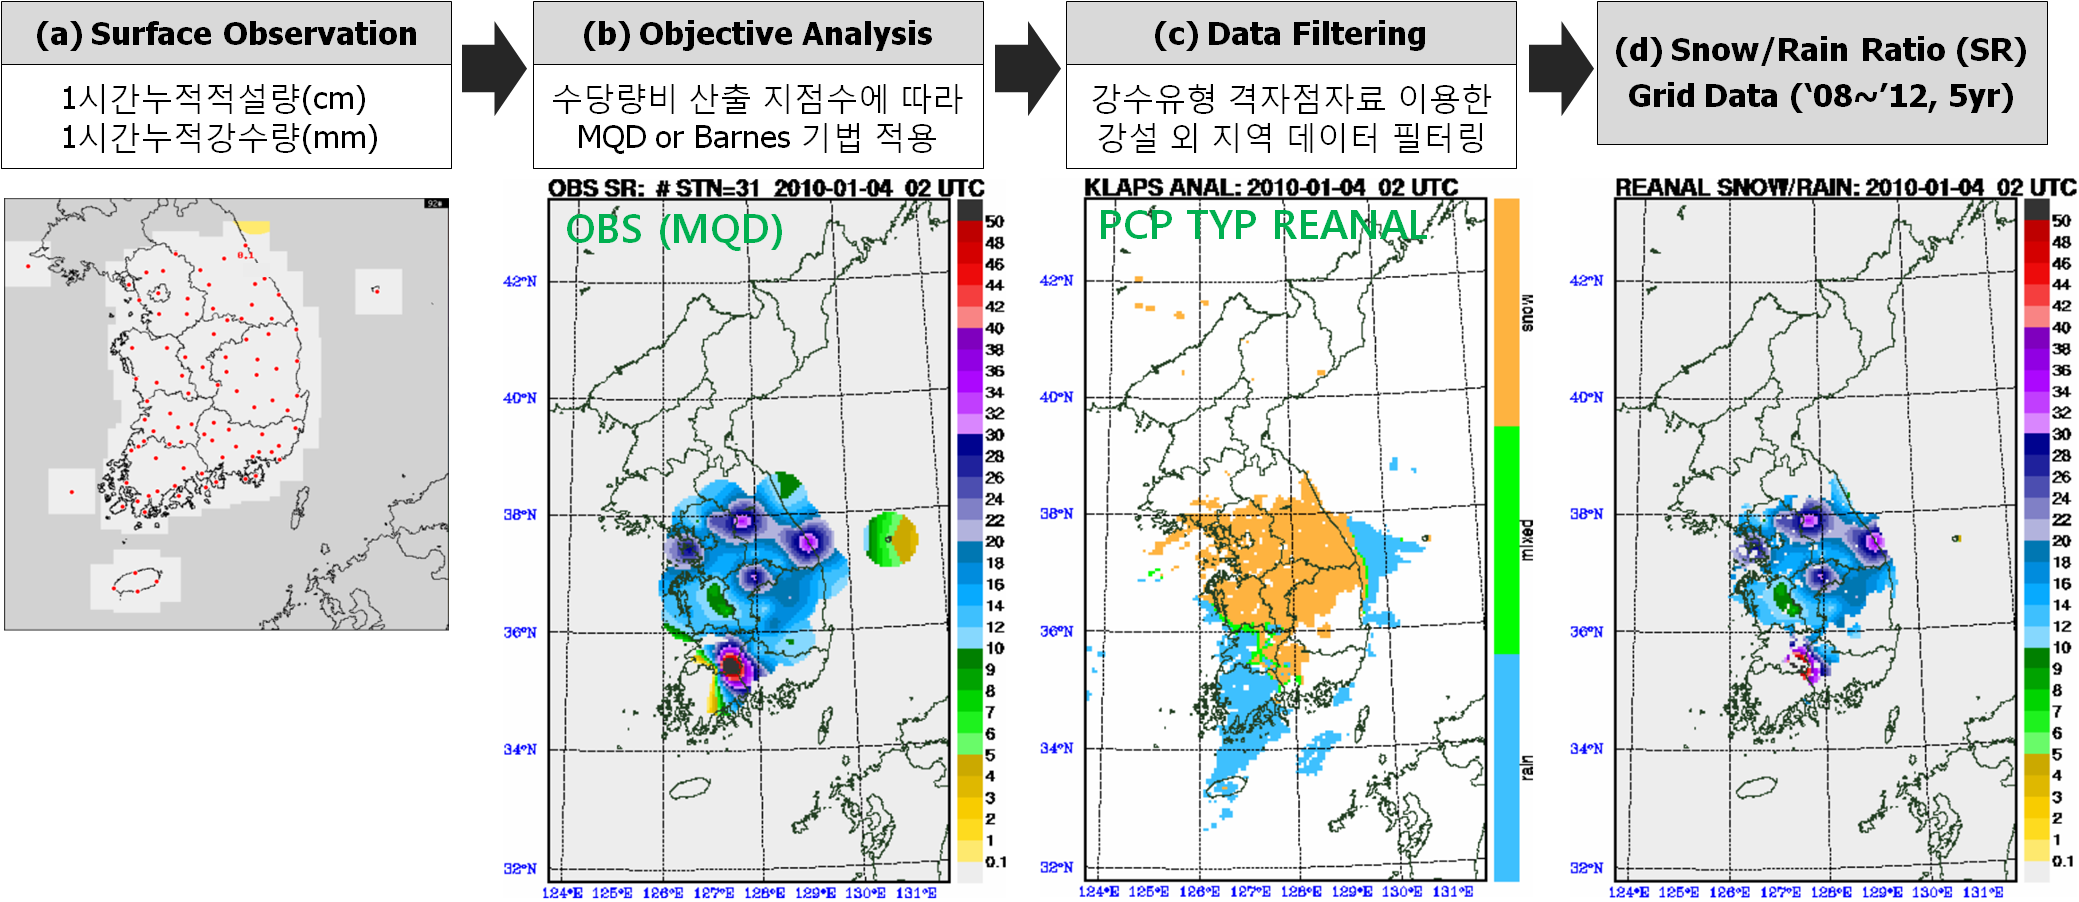 Fig. 2.2.3.4. Diagram for production of the SR(snow/rain ratio) grid data on the South Korean peninsula for the winter season.